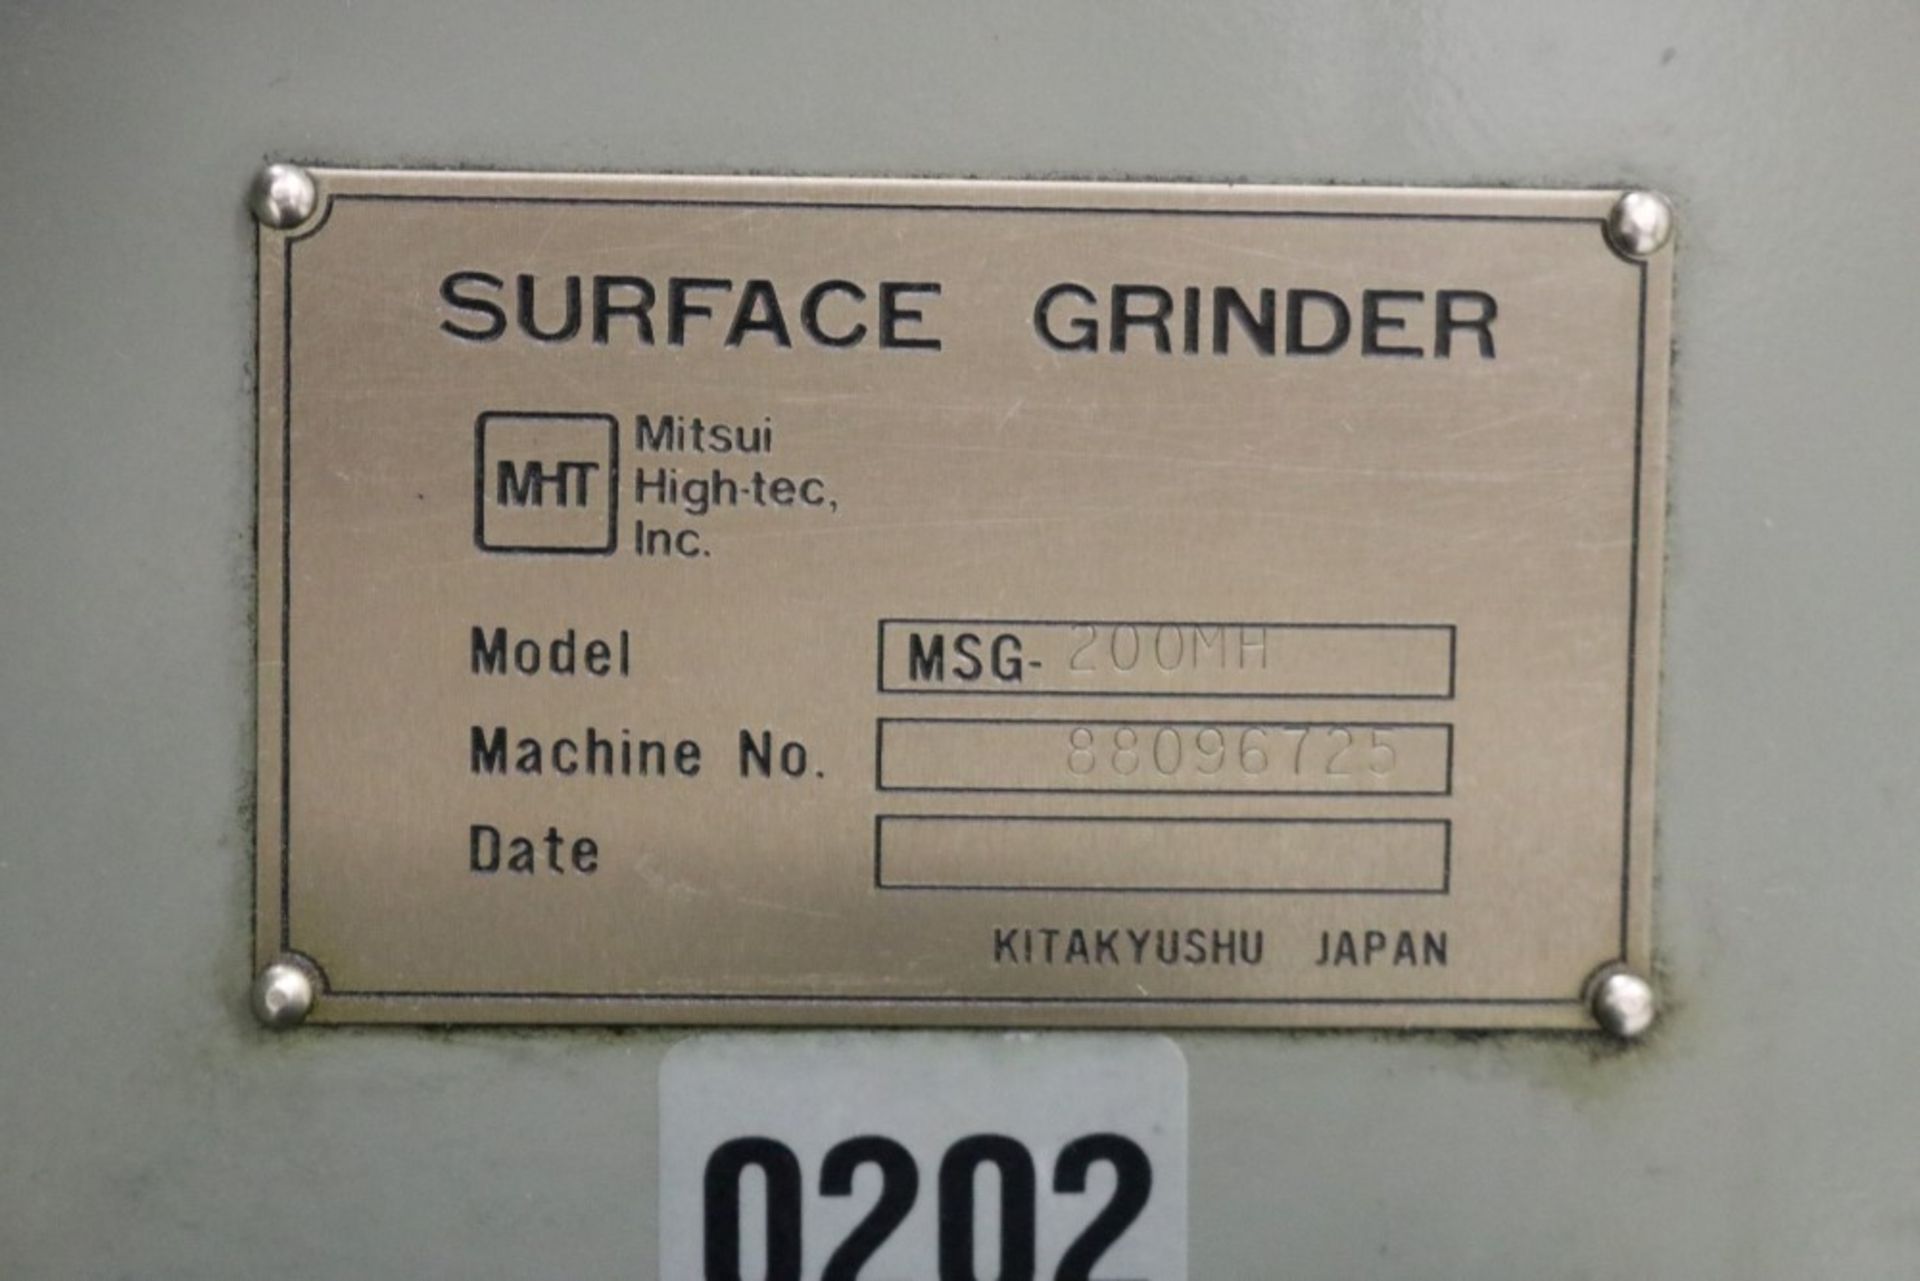 Precision Surface Grinder - Mitsui High-Tec 612 Model MSG-200MH w/ Vac-U- Guard - Image 8 of 9